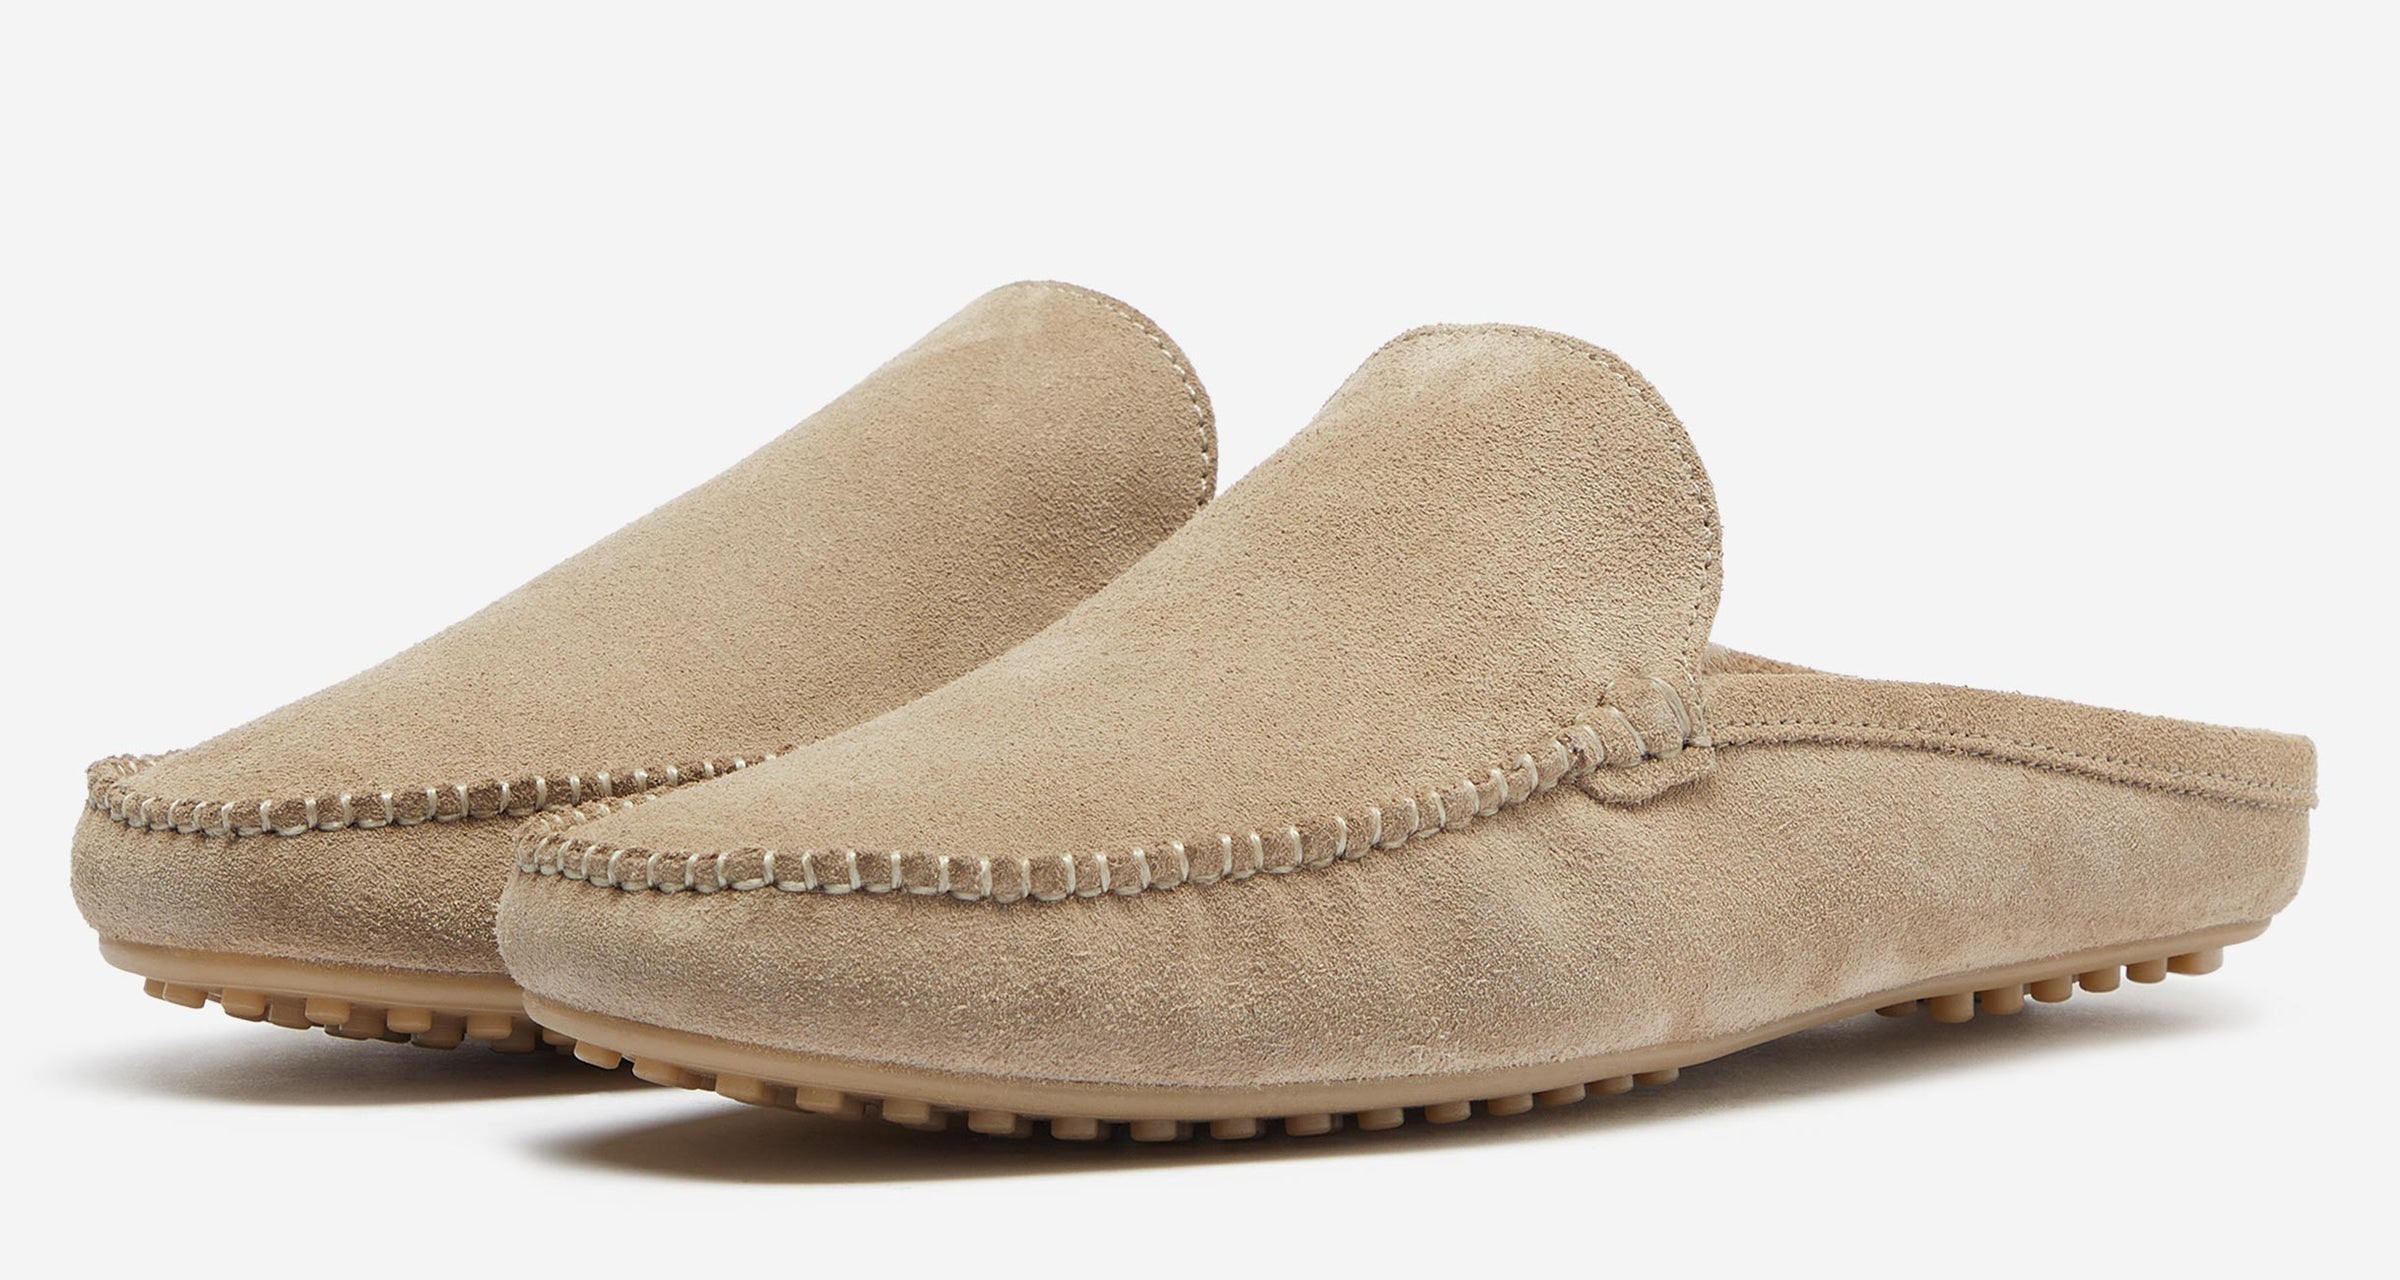 Gomes Stone Moccasin Slippers | Men's Slippers | Oliver Sweeney